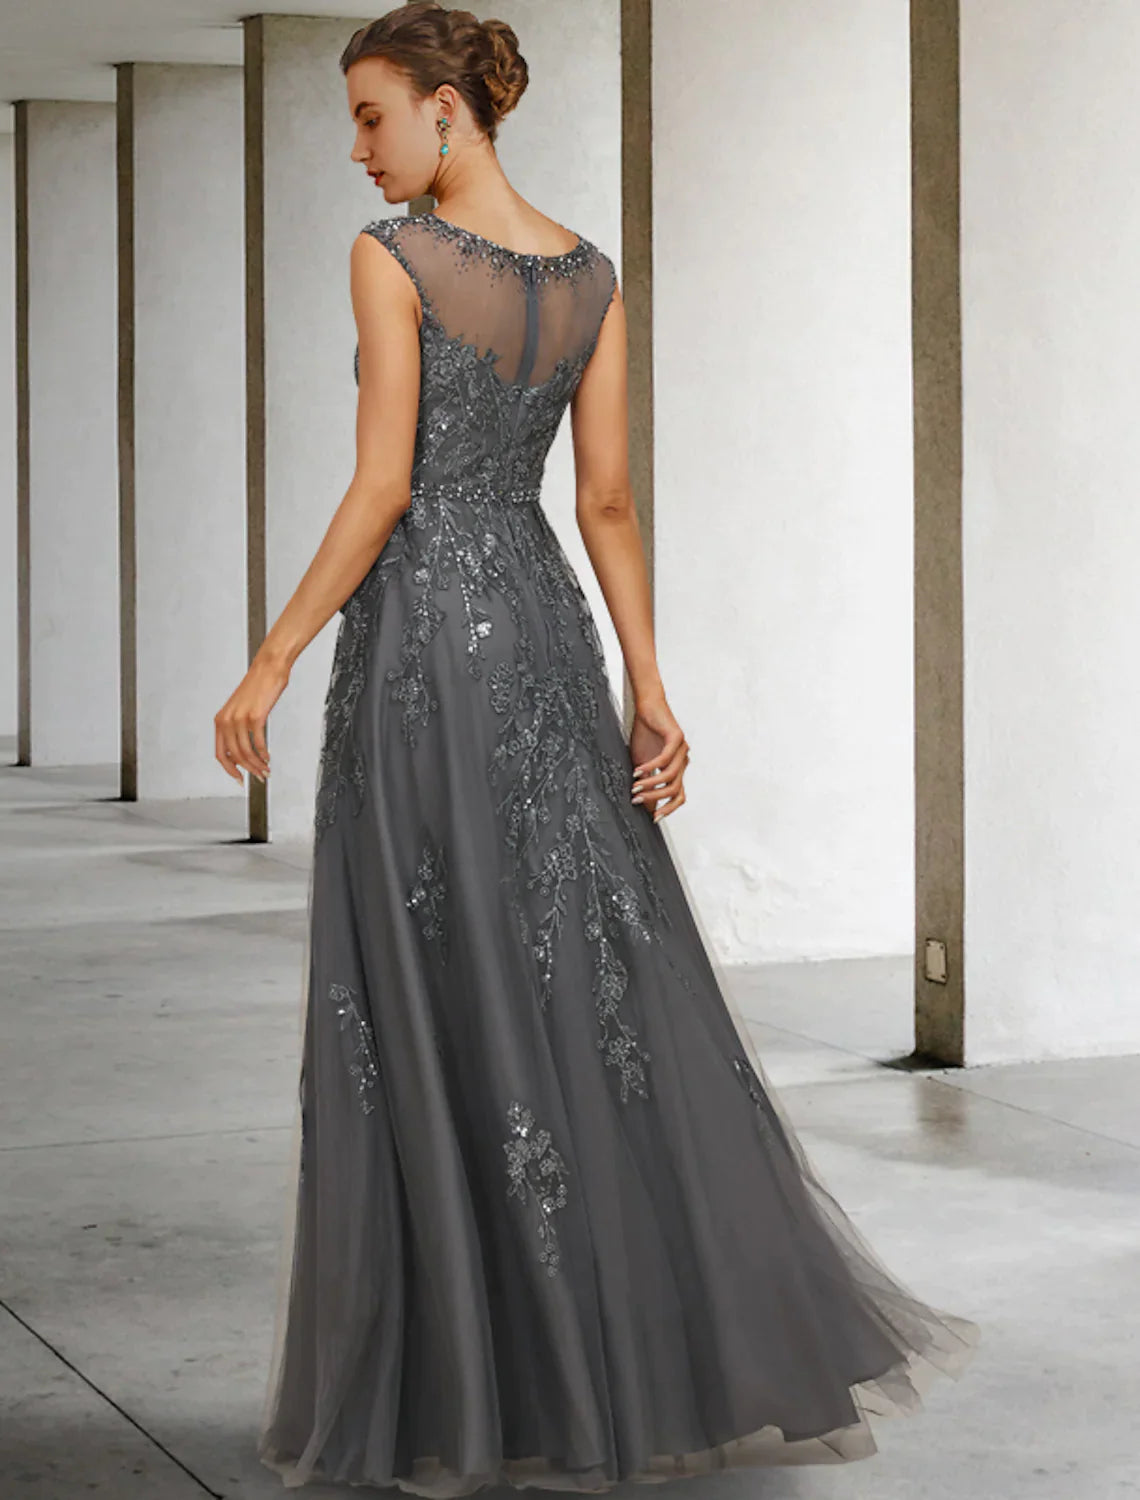 A-Line Mother of the Bride Dress Luxurious Elegant Floor Length Lace Tulle Sleeveless with Sash Ribbon Beading Sequin